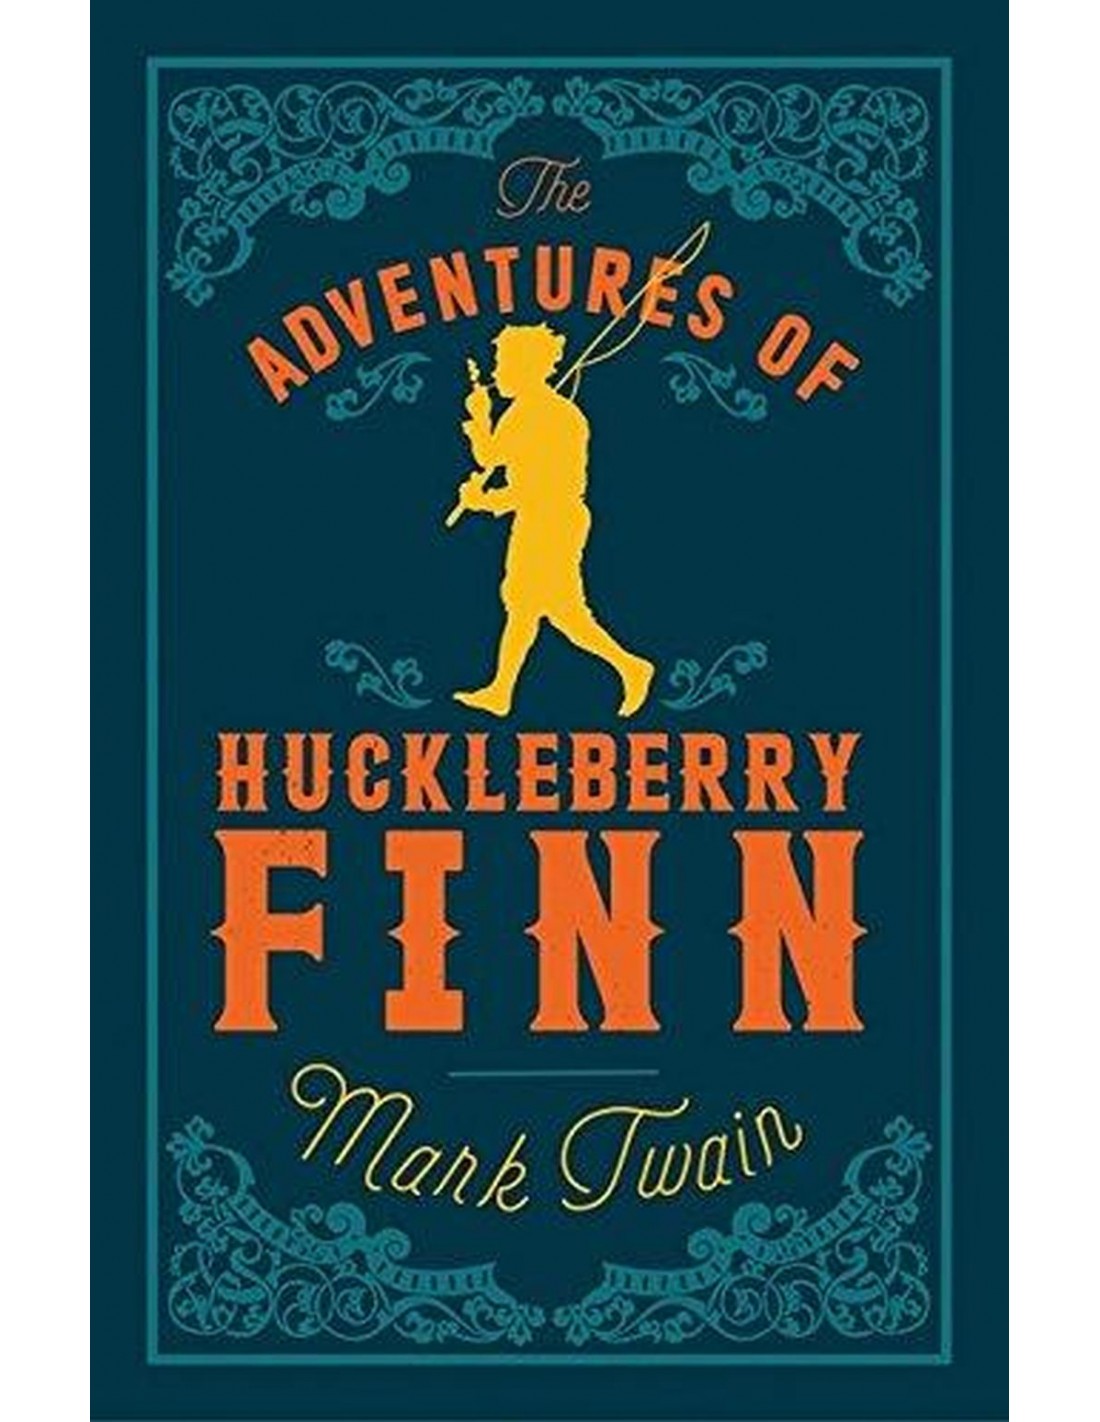 The Adventures of Huckleberry Finn for ios download free